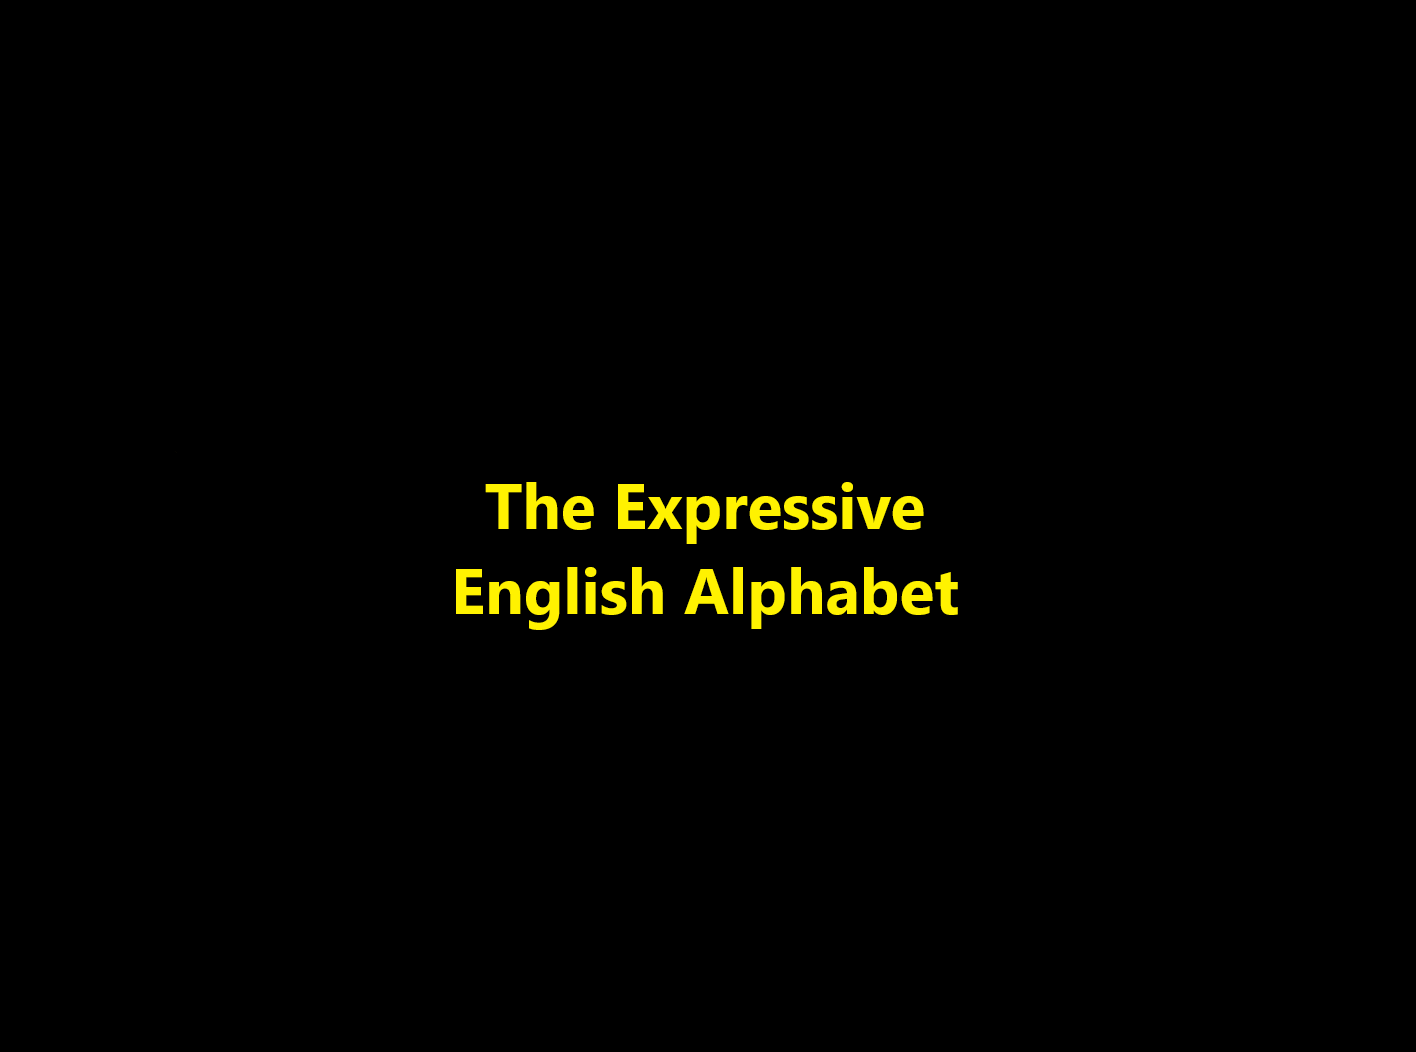 Learn the Expressive English Alphabet for free